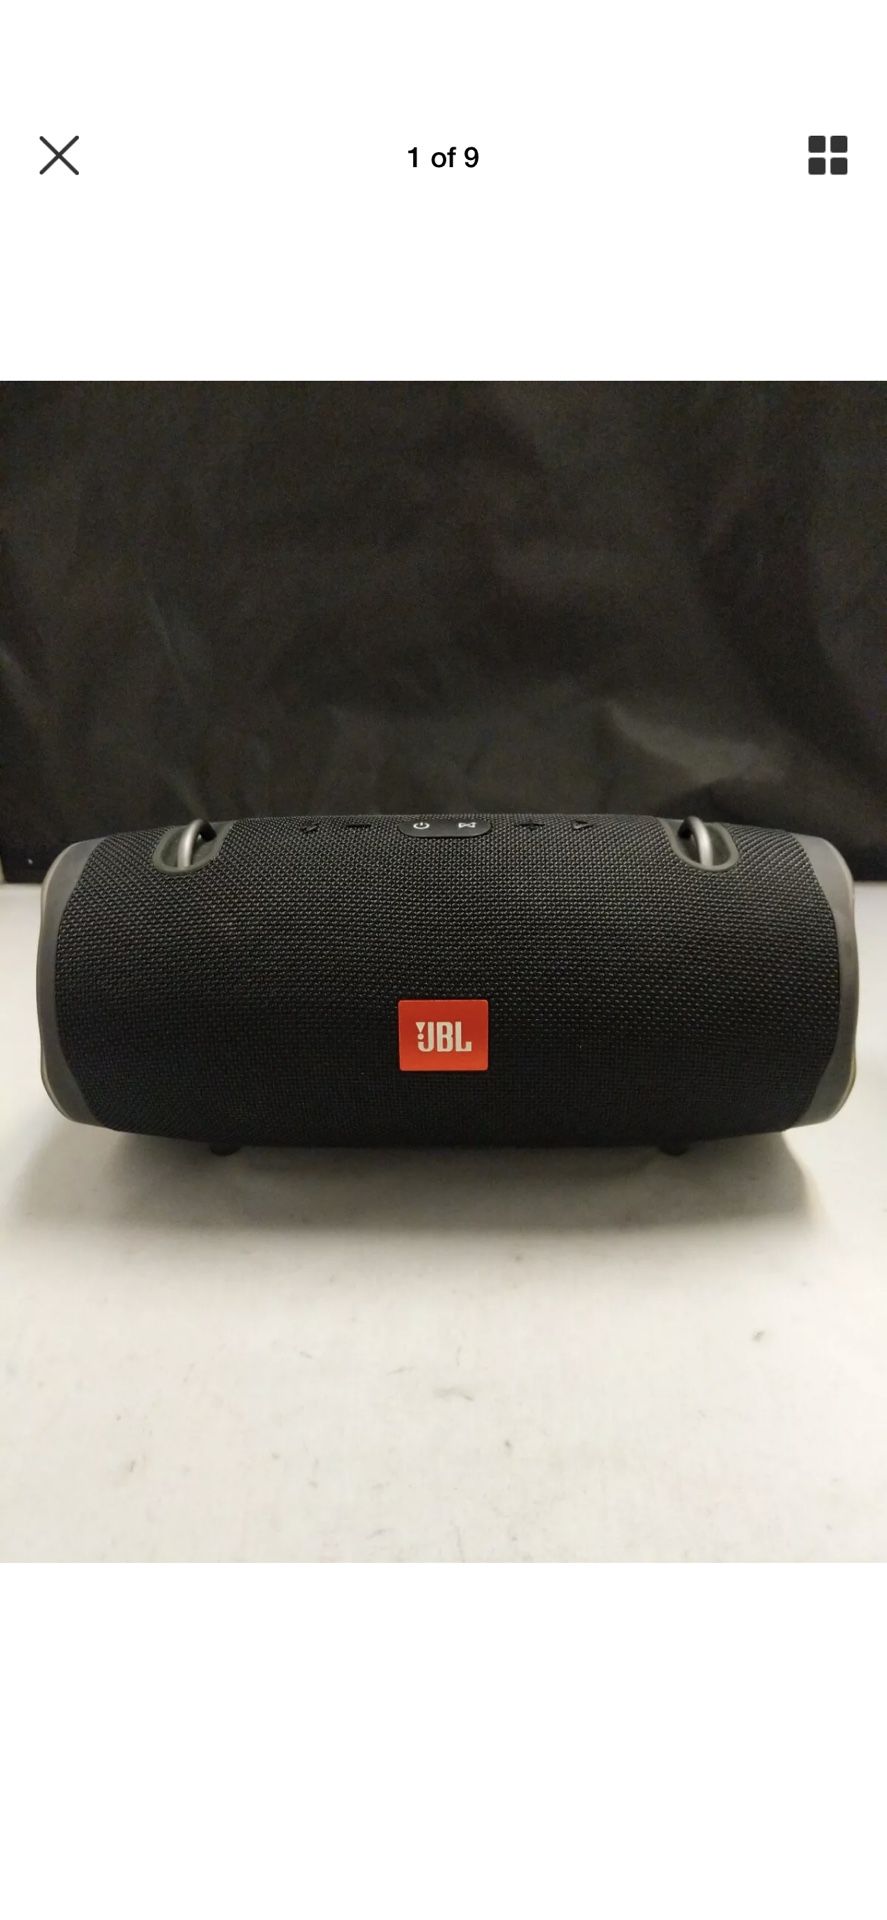 Would like to buy a JBL Xtreme 2